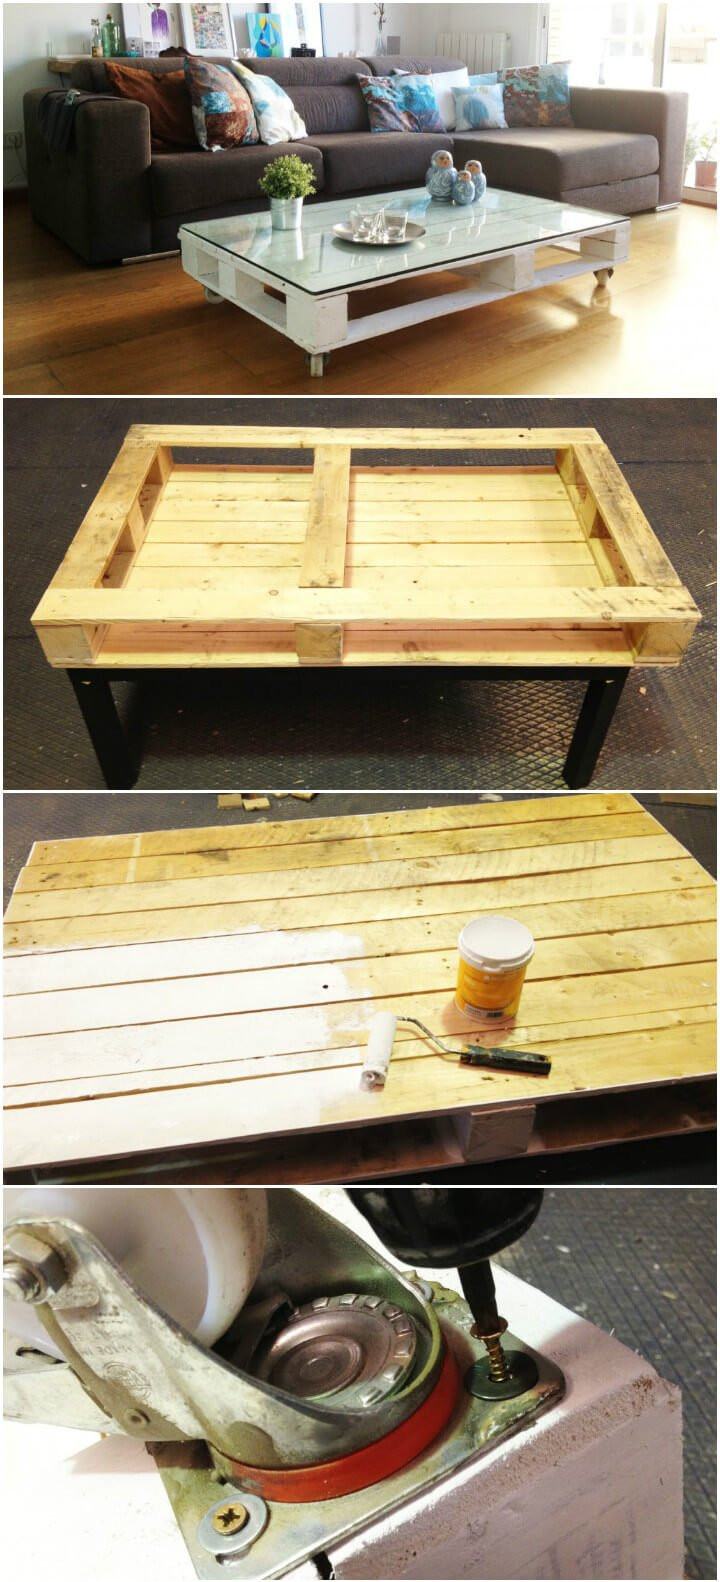 DIY Pallet Coffee Table Plans
 50 Easy & Free Plans to Build a DIY Coffee Table ⋆ DIY Crafts